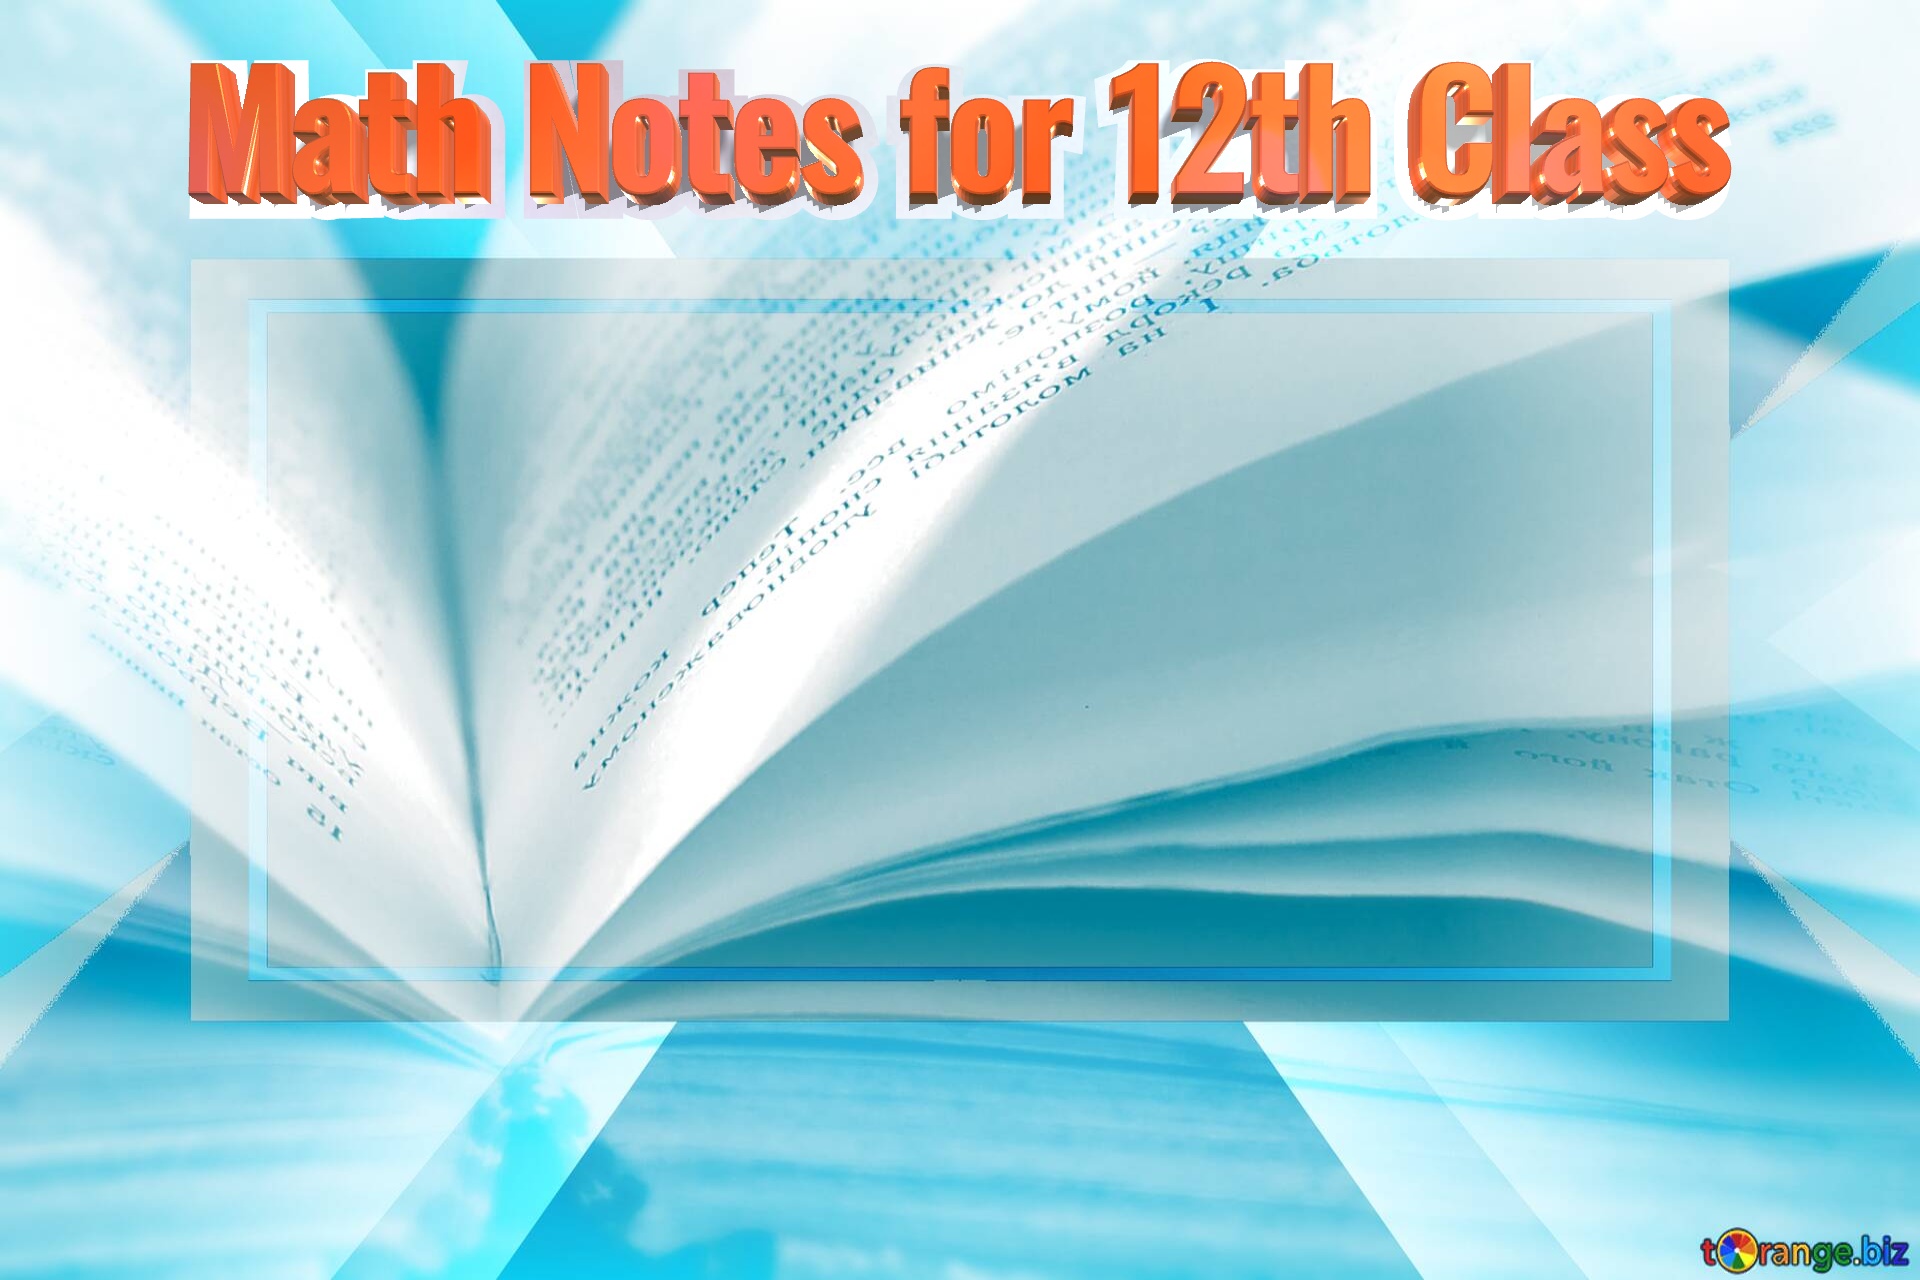 Math Notes for 12th Class  books powerpoint template background №0